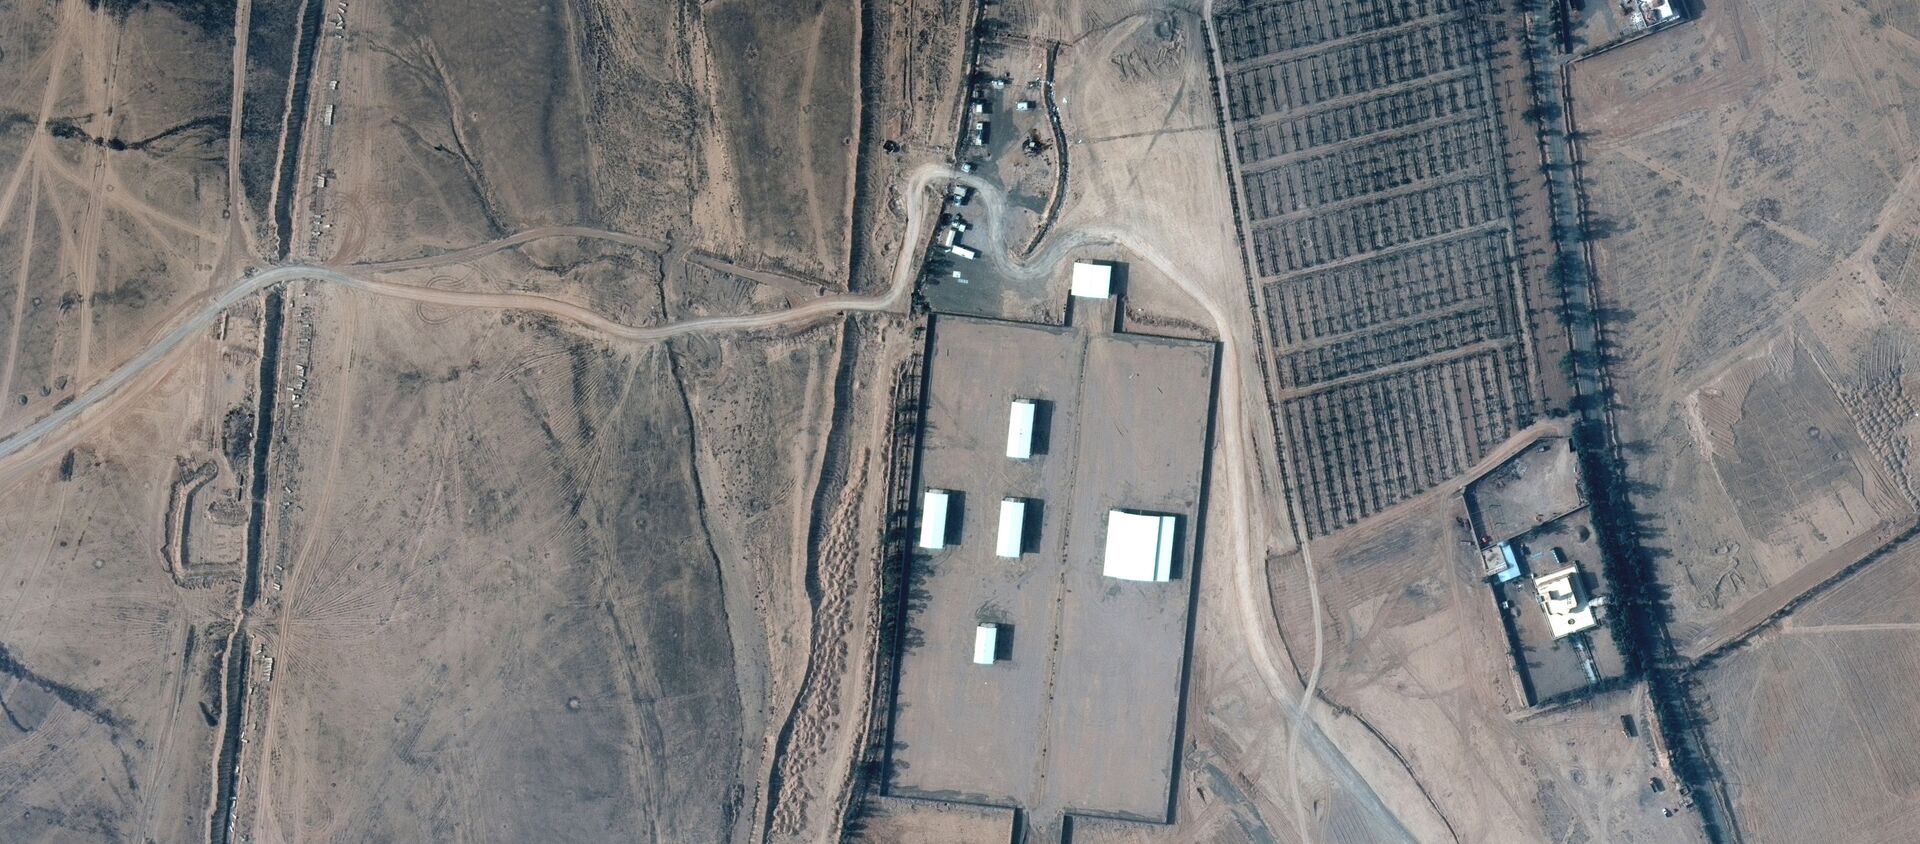 A closer view of an Iraq-Syria border crossing and buildings before airstrikes, seen in this February 3, 2021 handout satellite image provided by Maxar. - Sputnik International, 1920, 06.03.2021